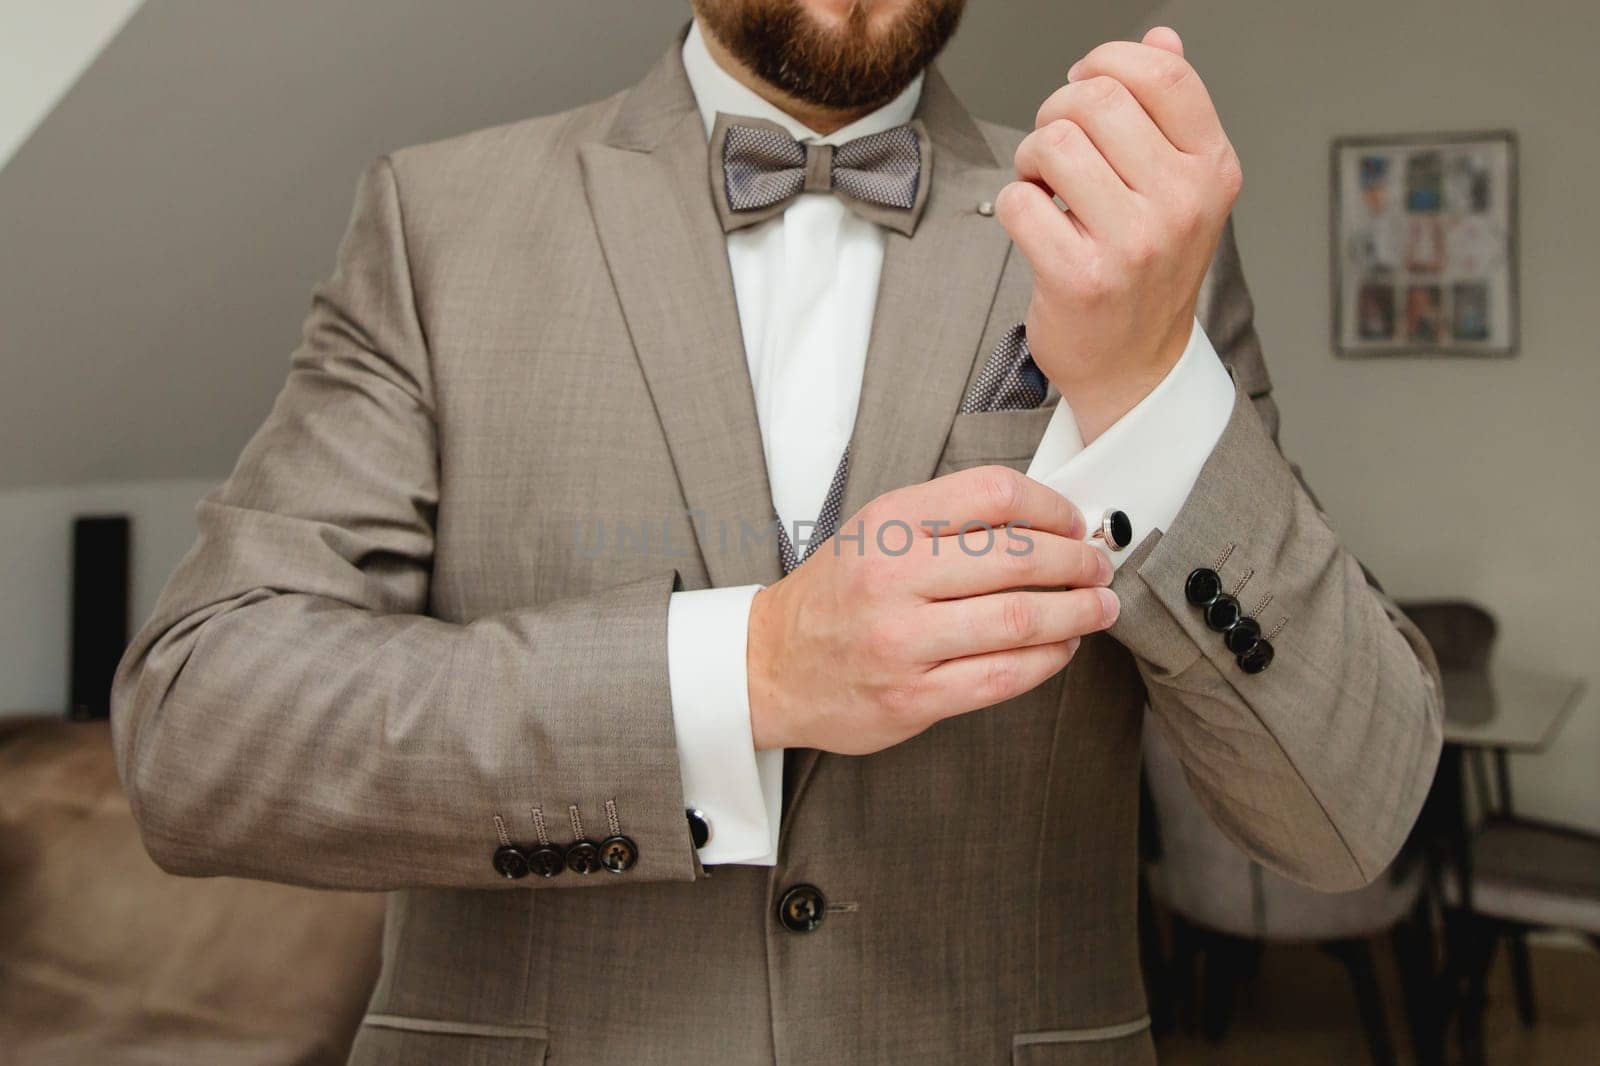 A groom putting on cuff-links. Groom's suit.